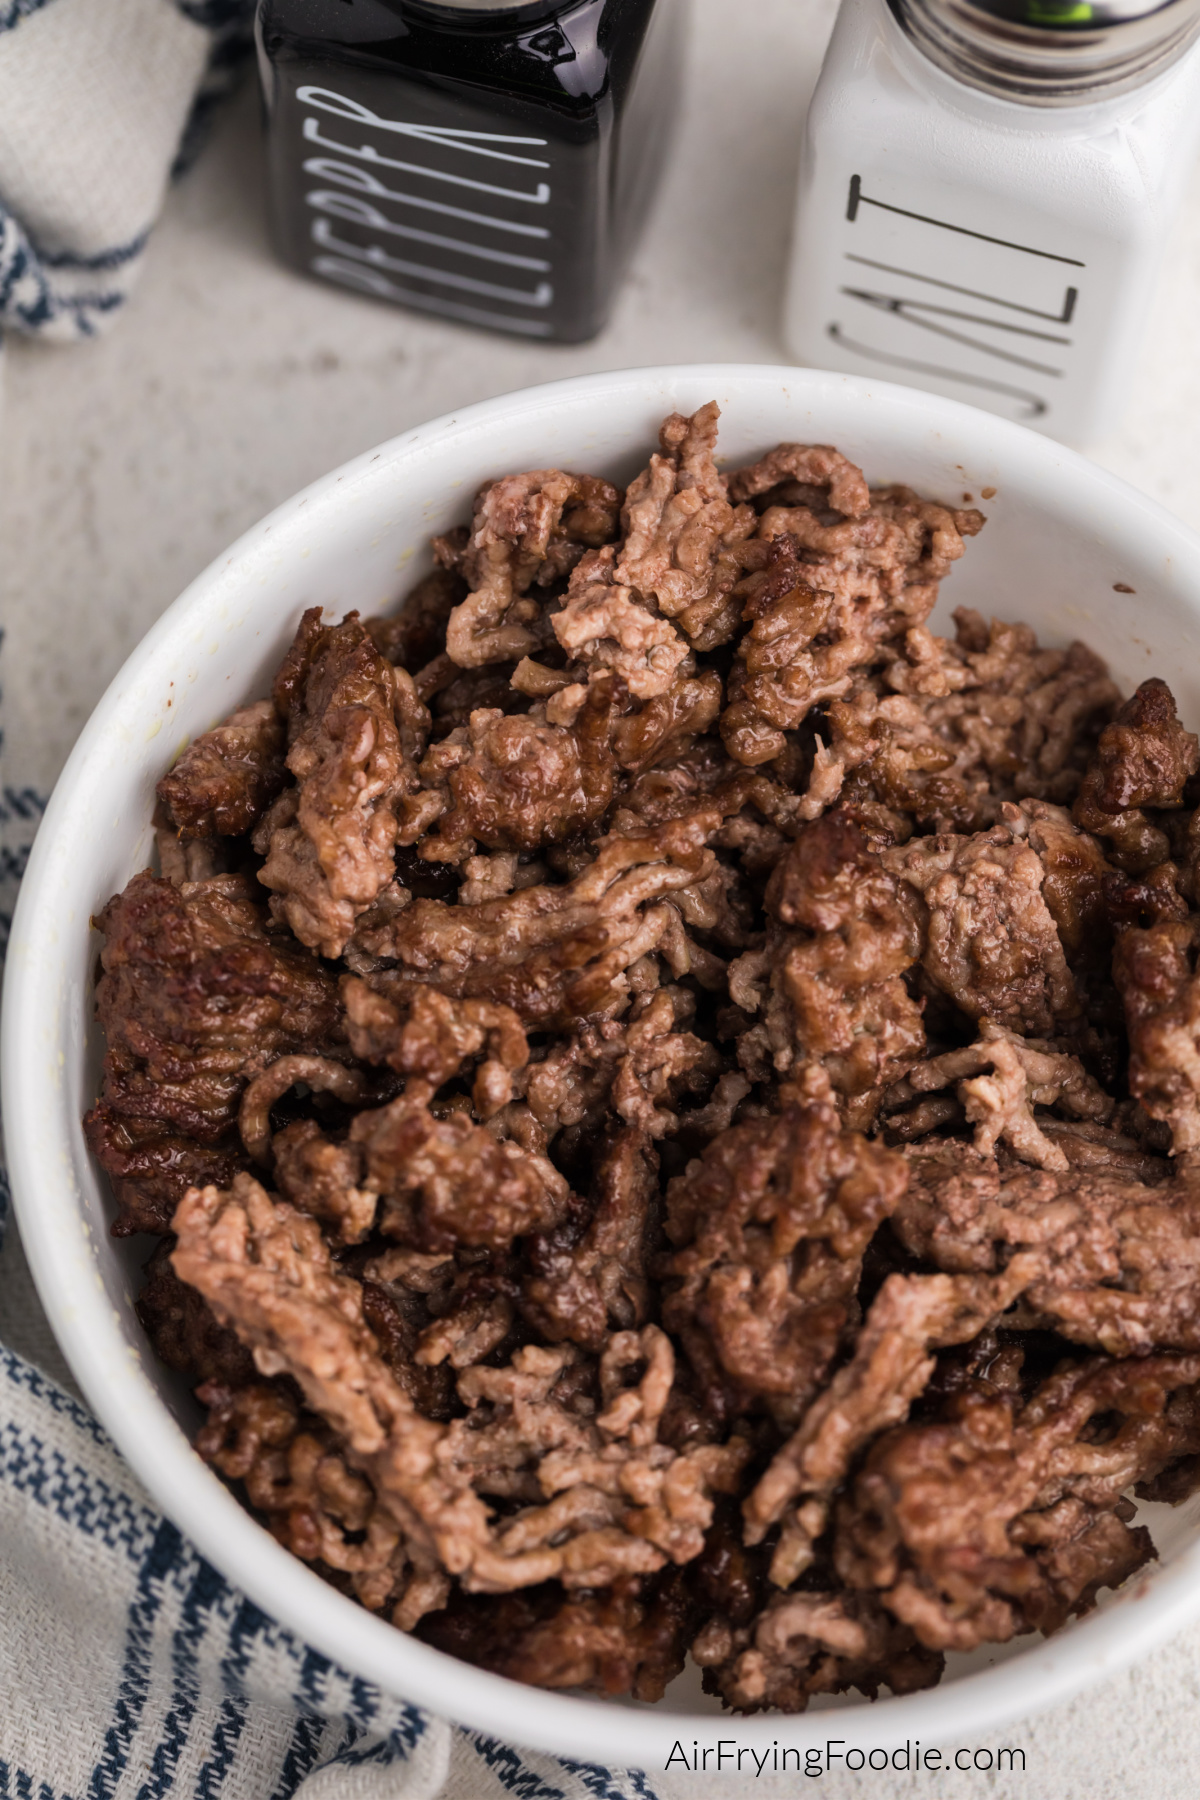 CLose up photo of air fried ground beef in a white bowl.